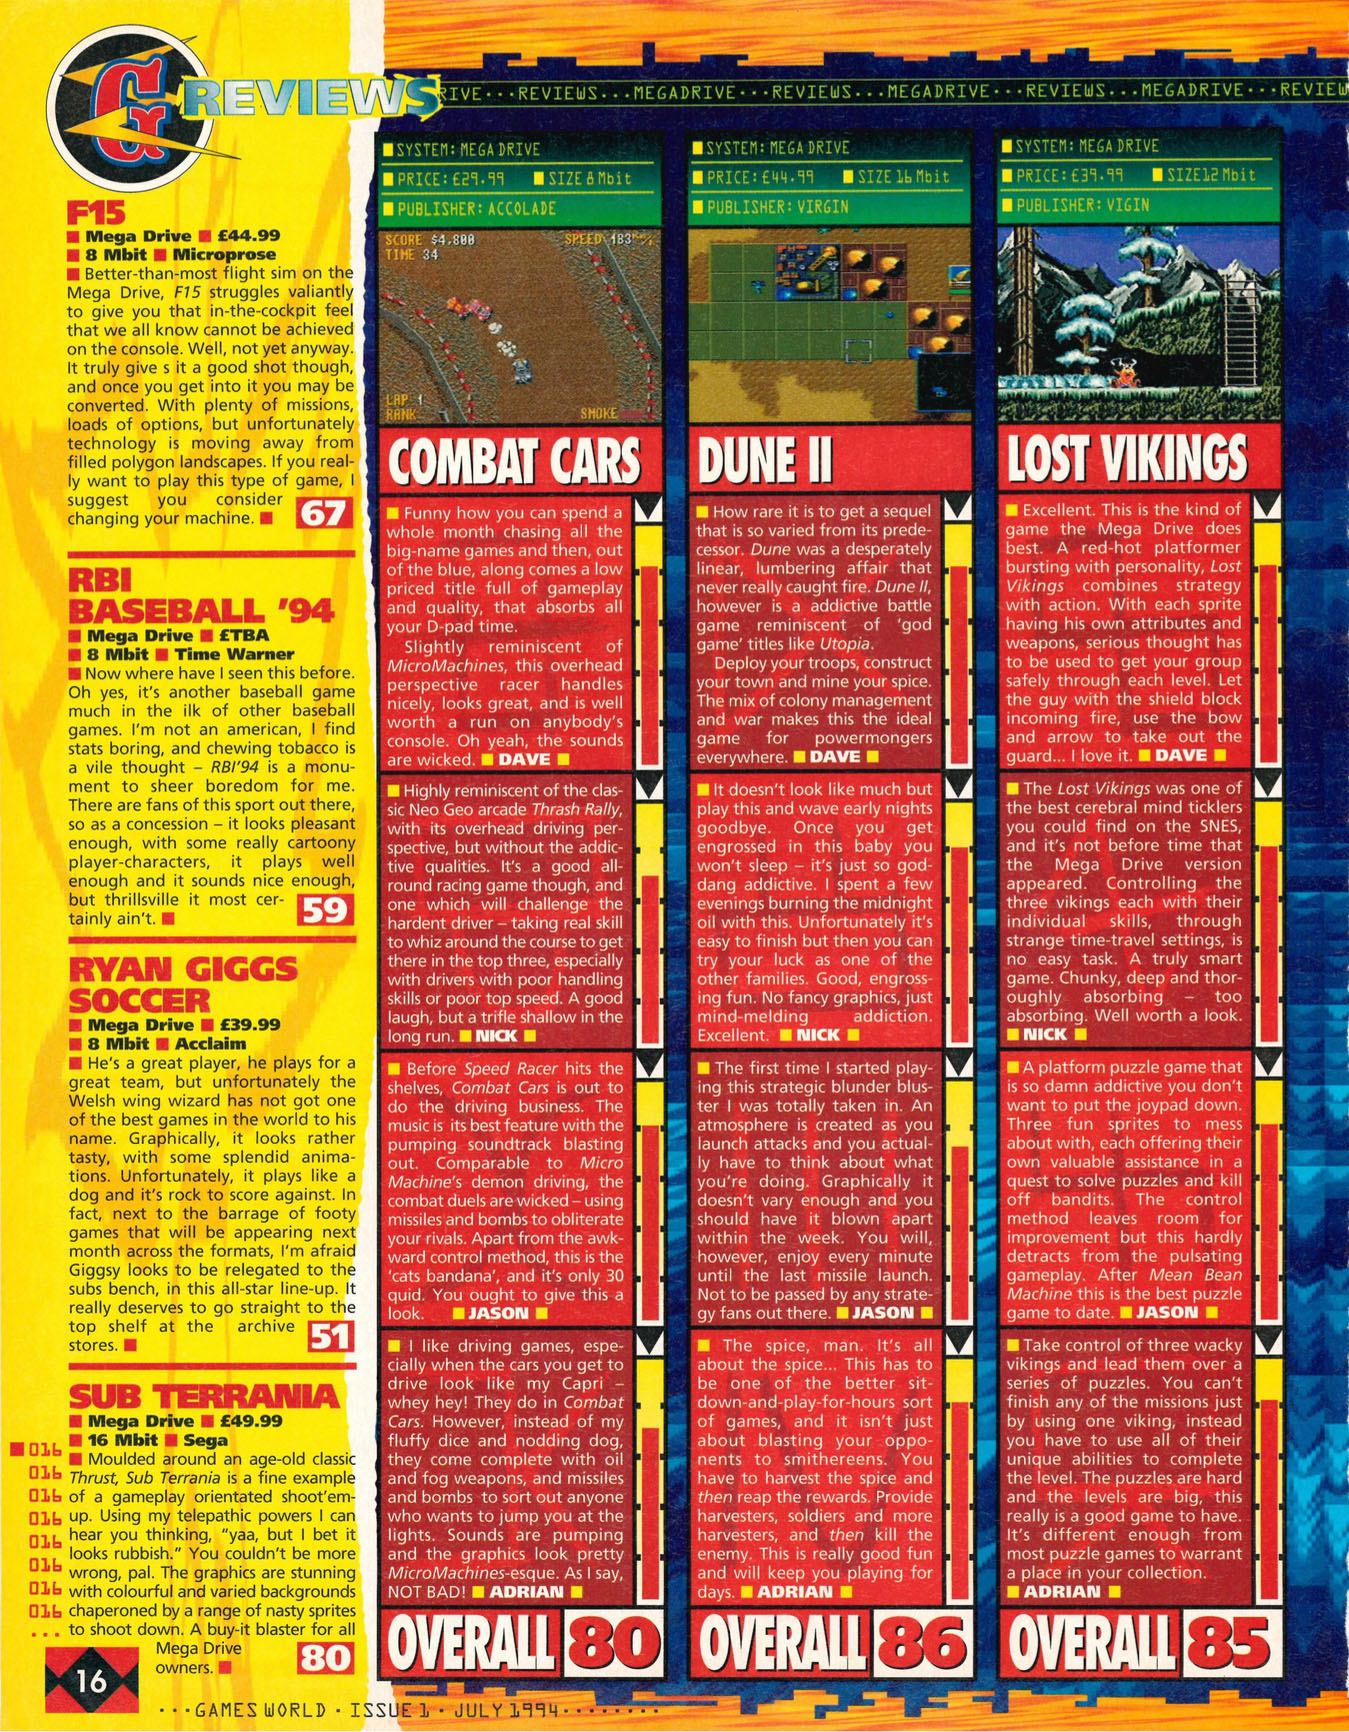 RBI Baseball '94 Review, Games World July 1994 page 16